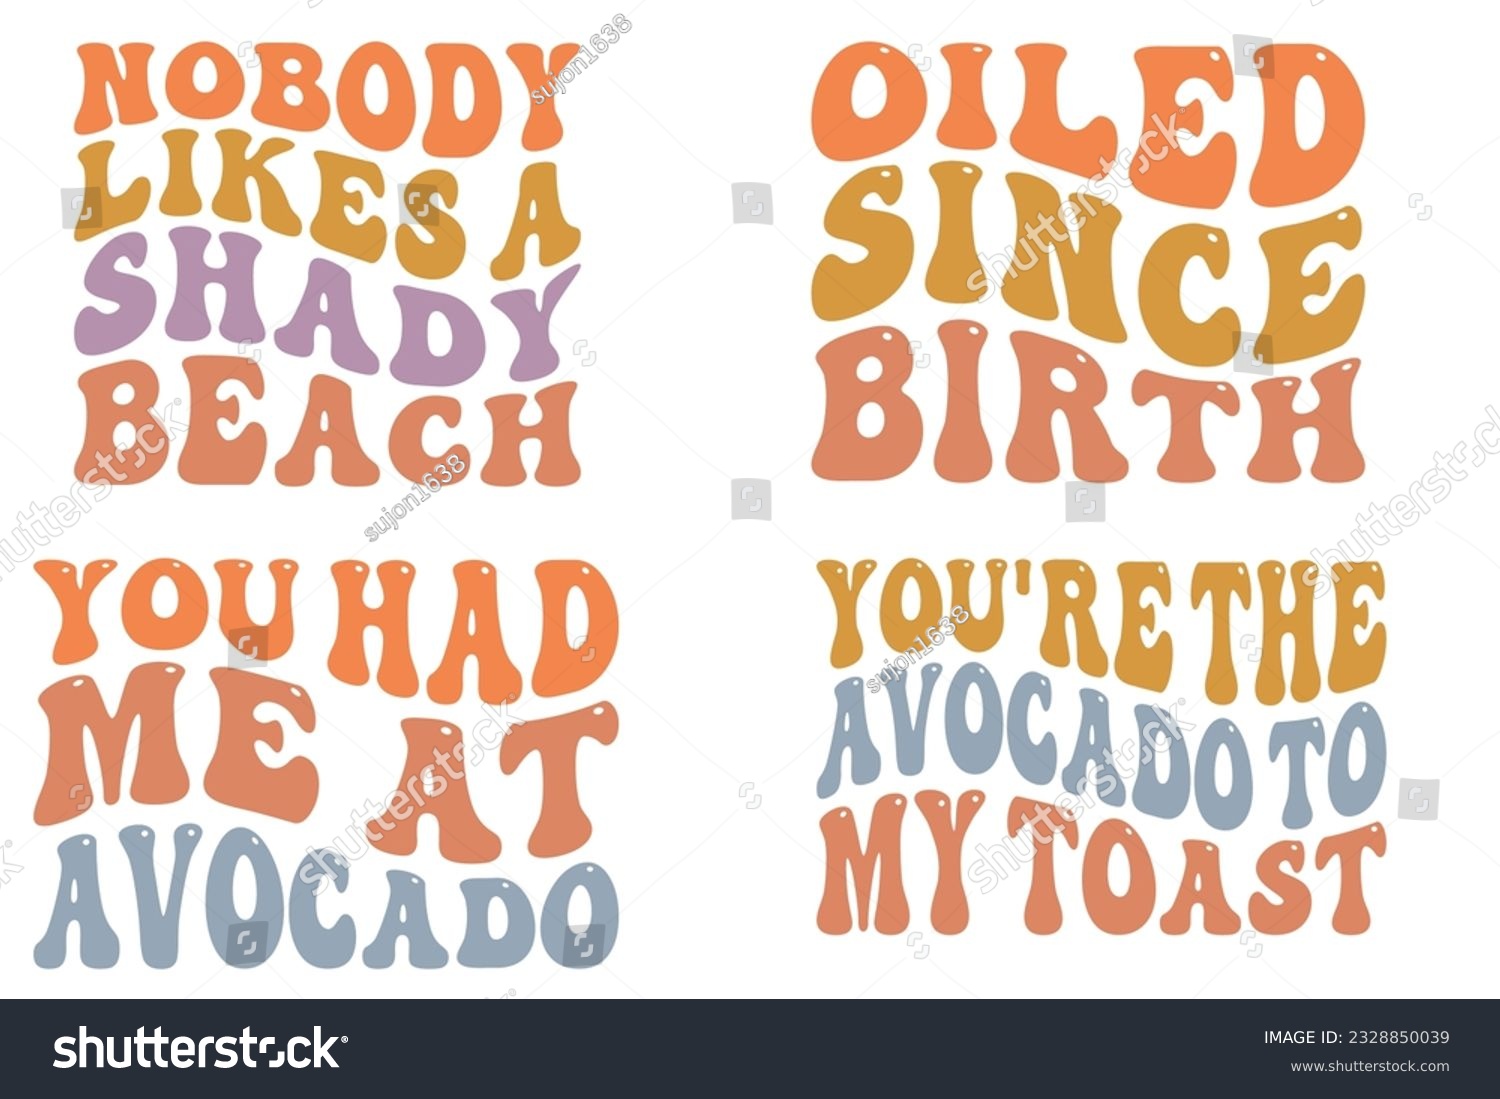 SVG of Nobody Likes a Shady Beach, Oiled Since Birth, You Had Me at Avocado, You're the Avocado to My Toast retro wavy SVG bundle T-shirt svg